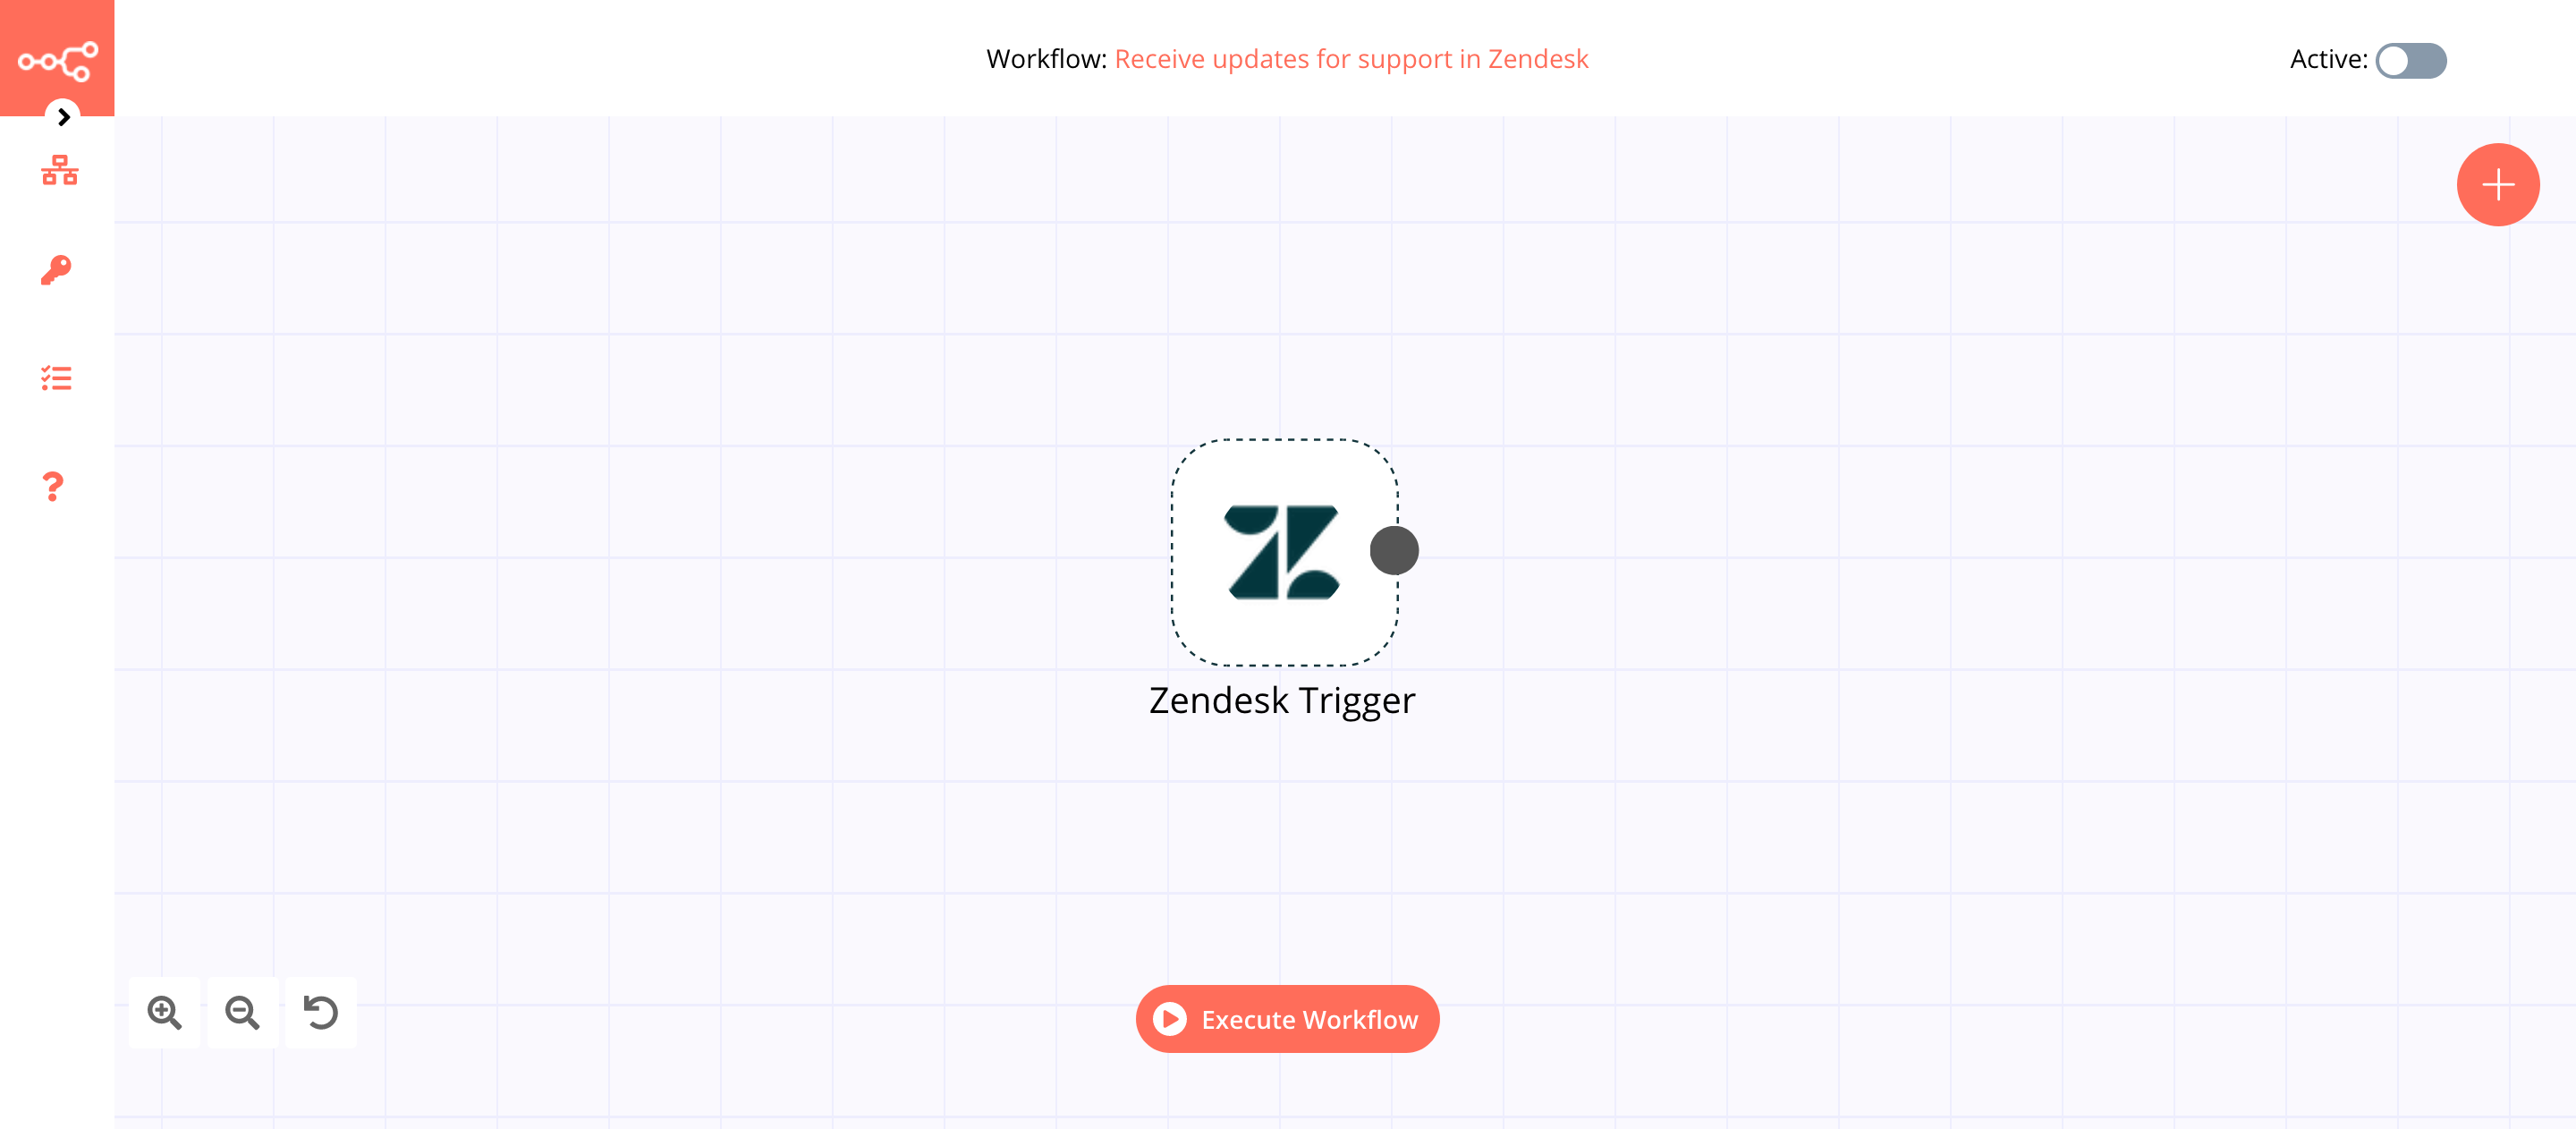 A workflow with the Zendesk Trigger node